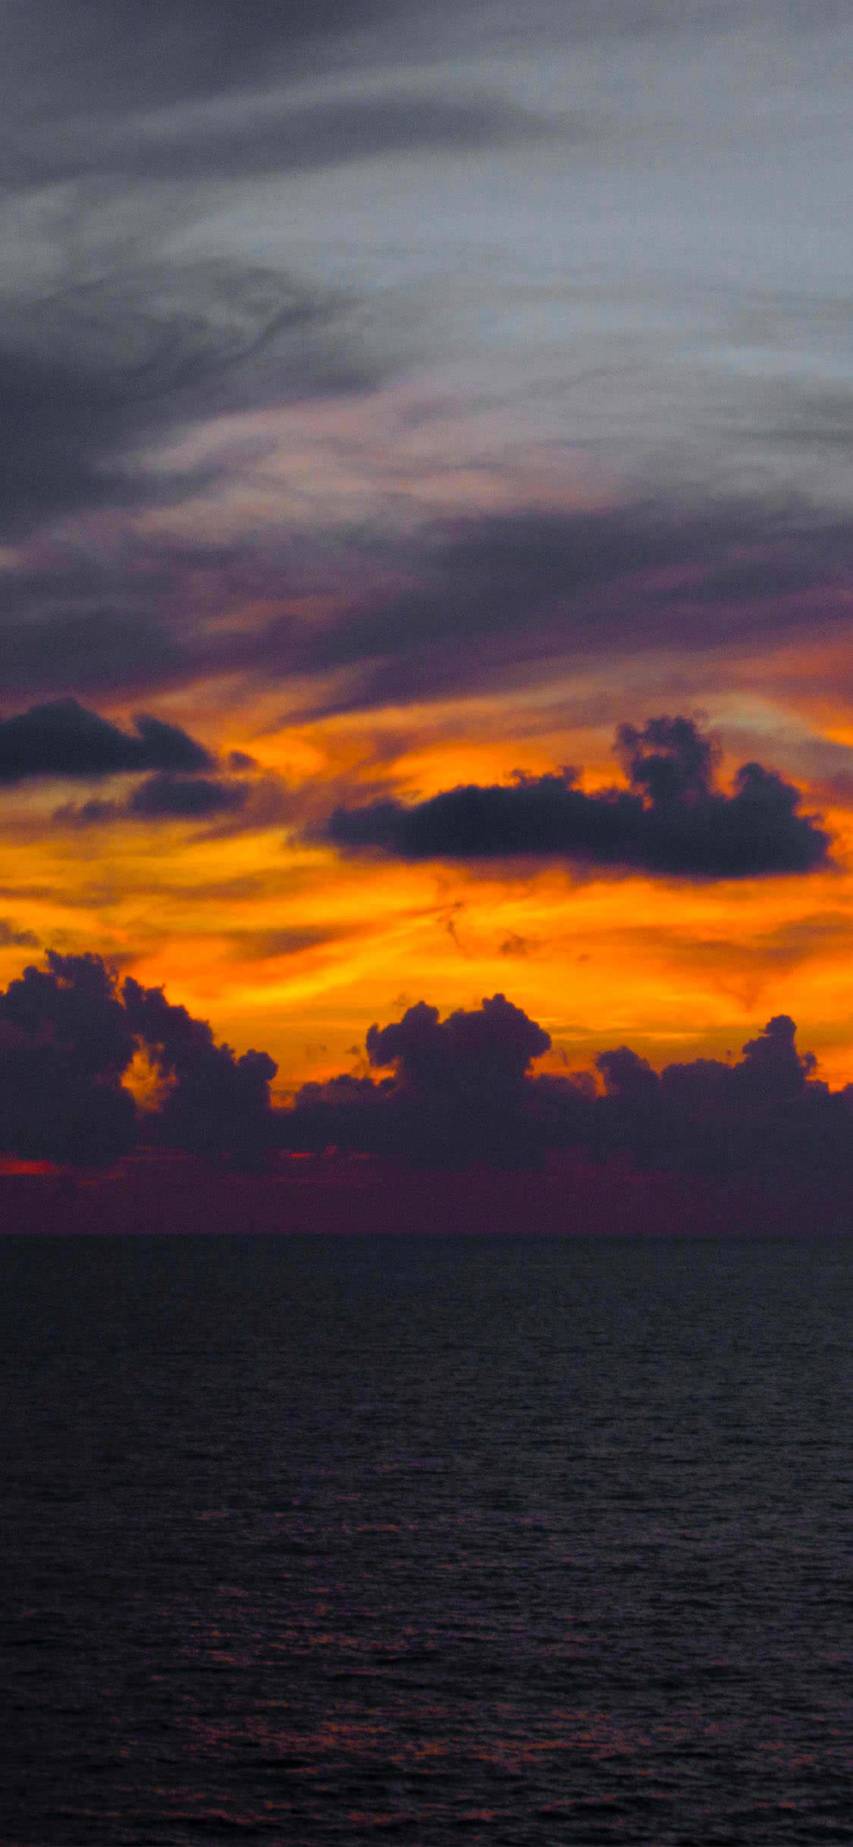 A photo of a sunset over the ocean with a dark purple and orange sky. - Sunset